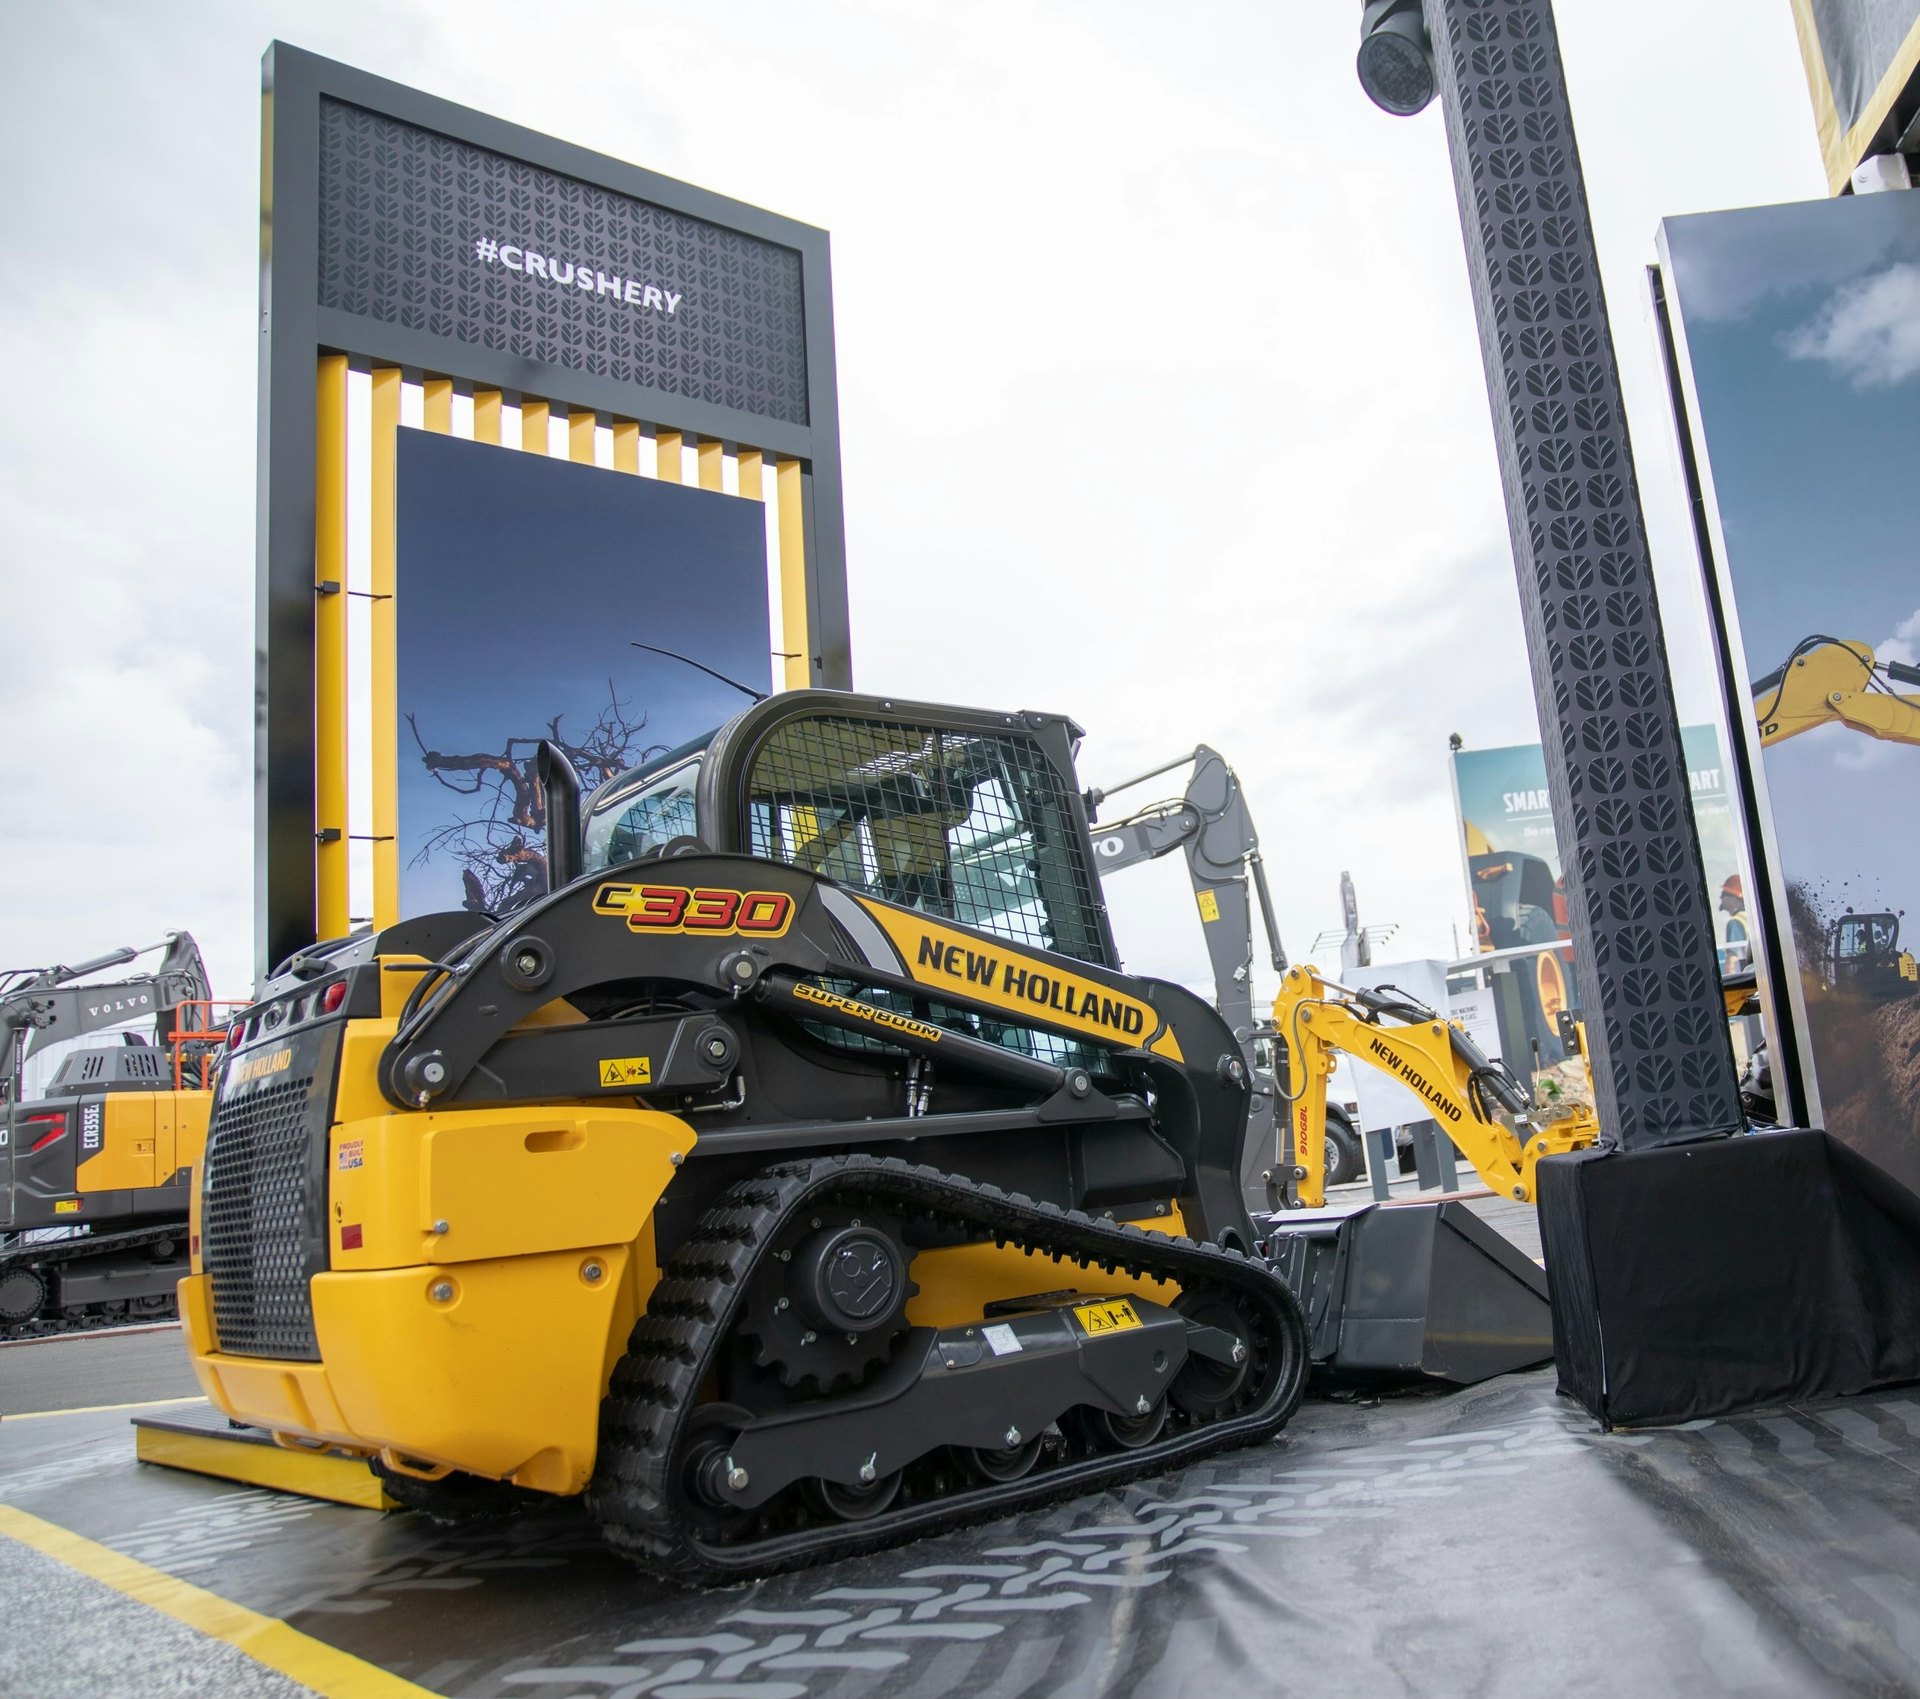 New Holland Showcases C330 Vertical Lift Compact Track Loader at